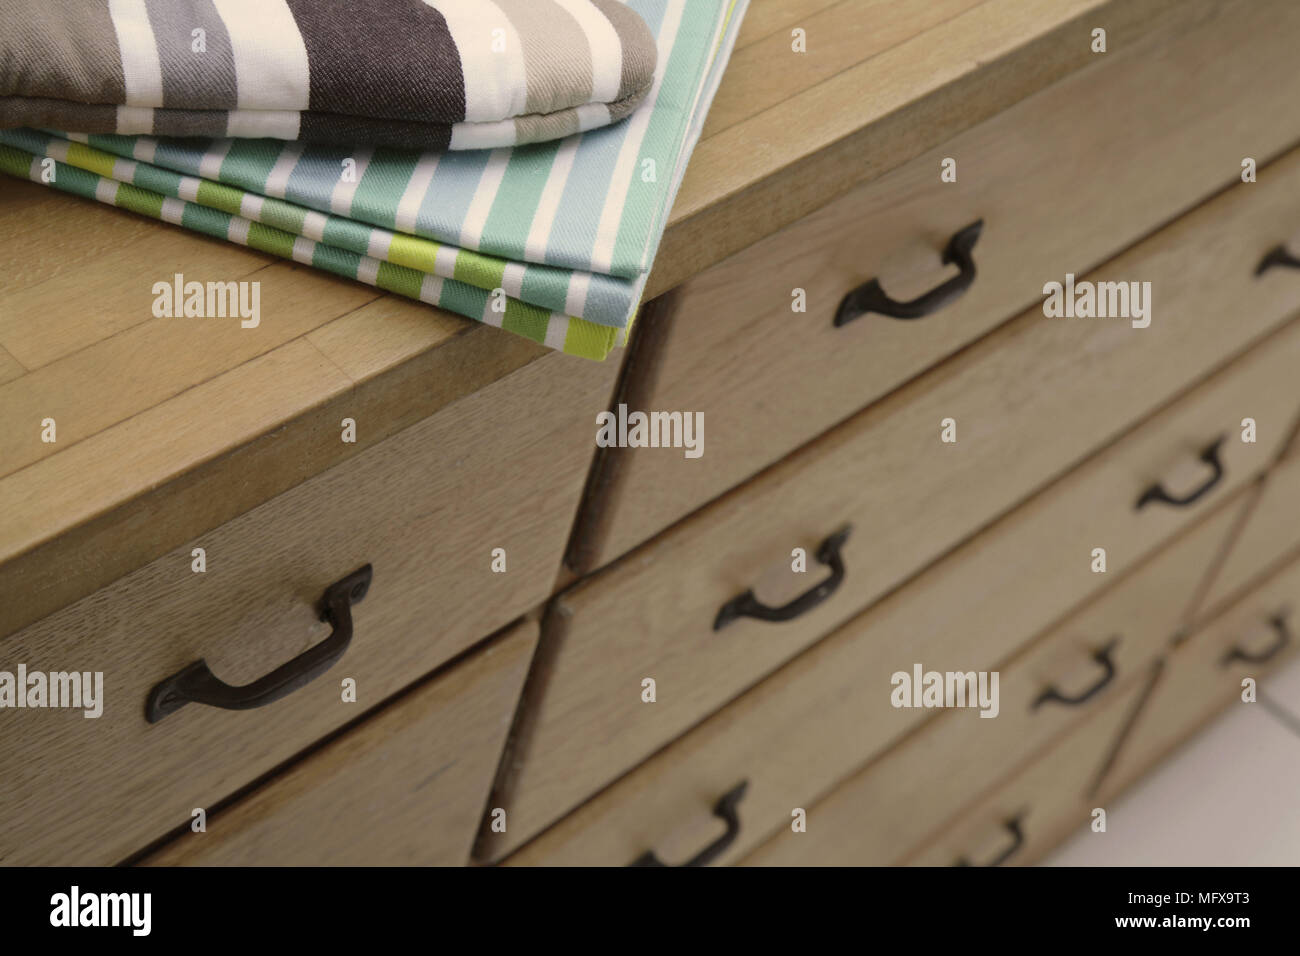 Tea towel on wooden chest of drawers. Stock Photo